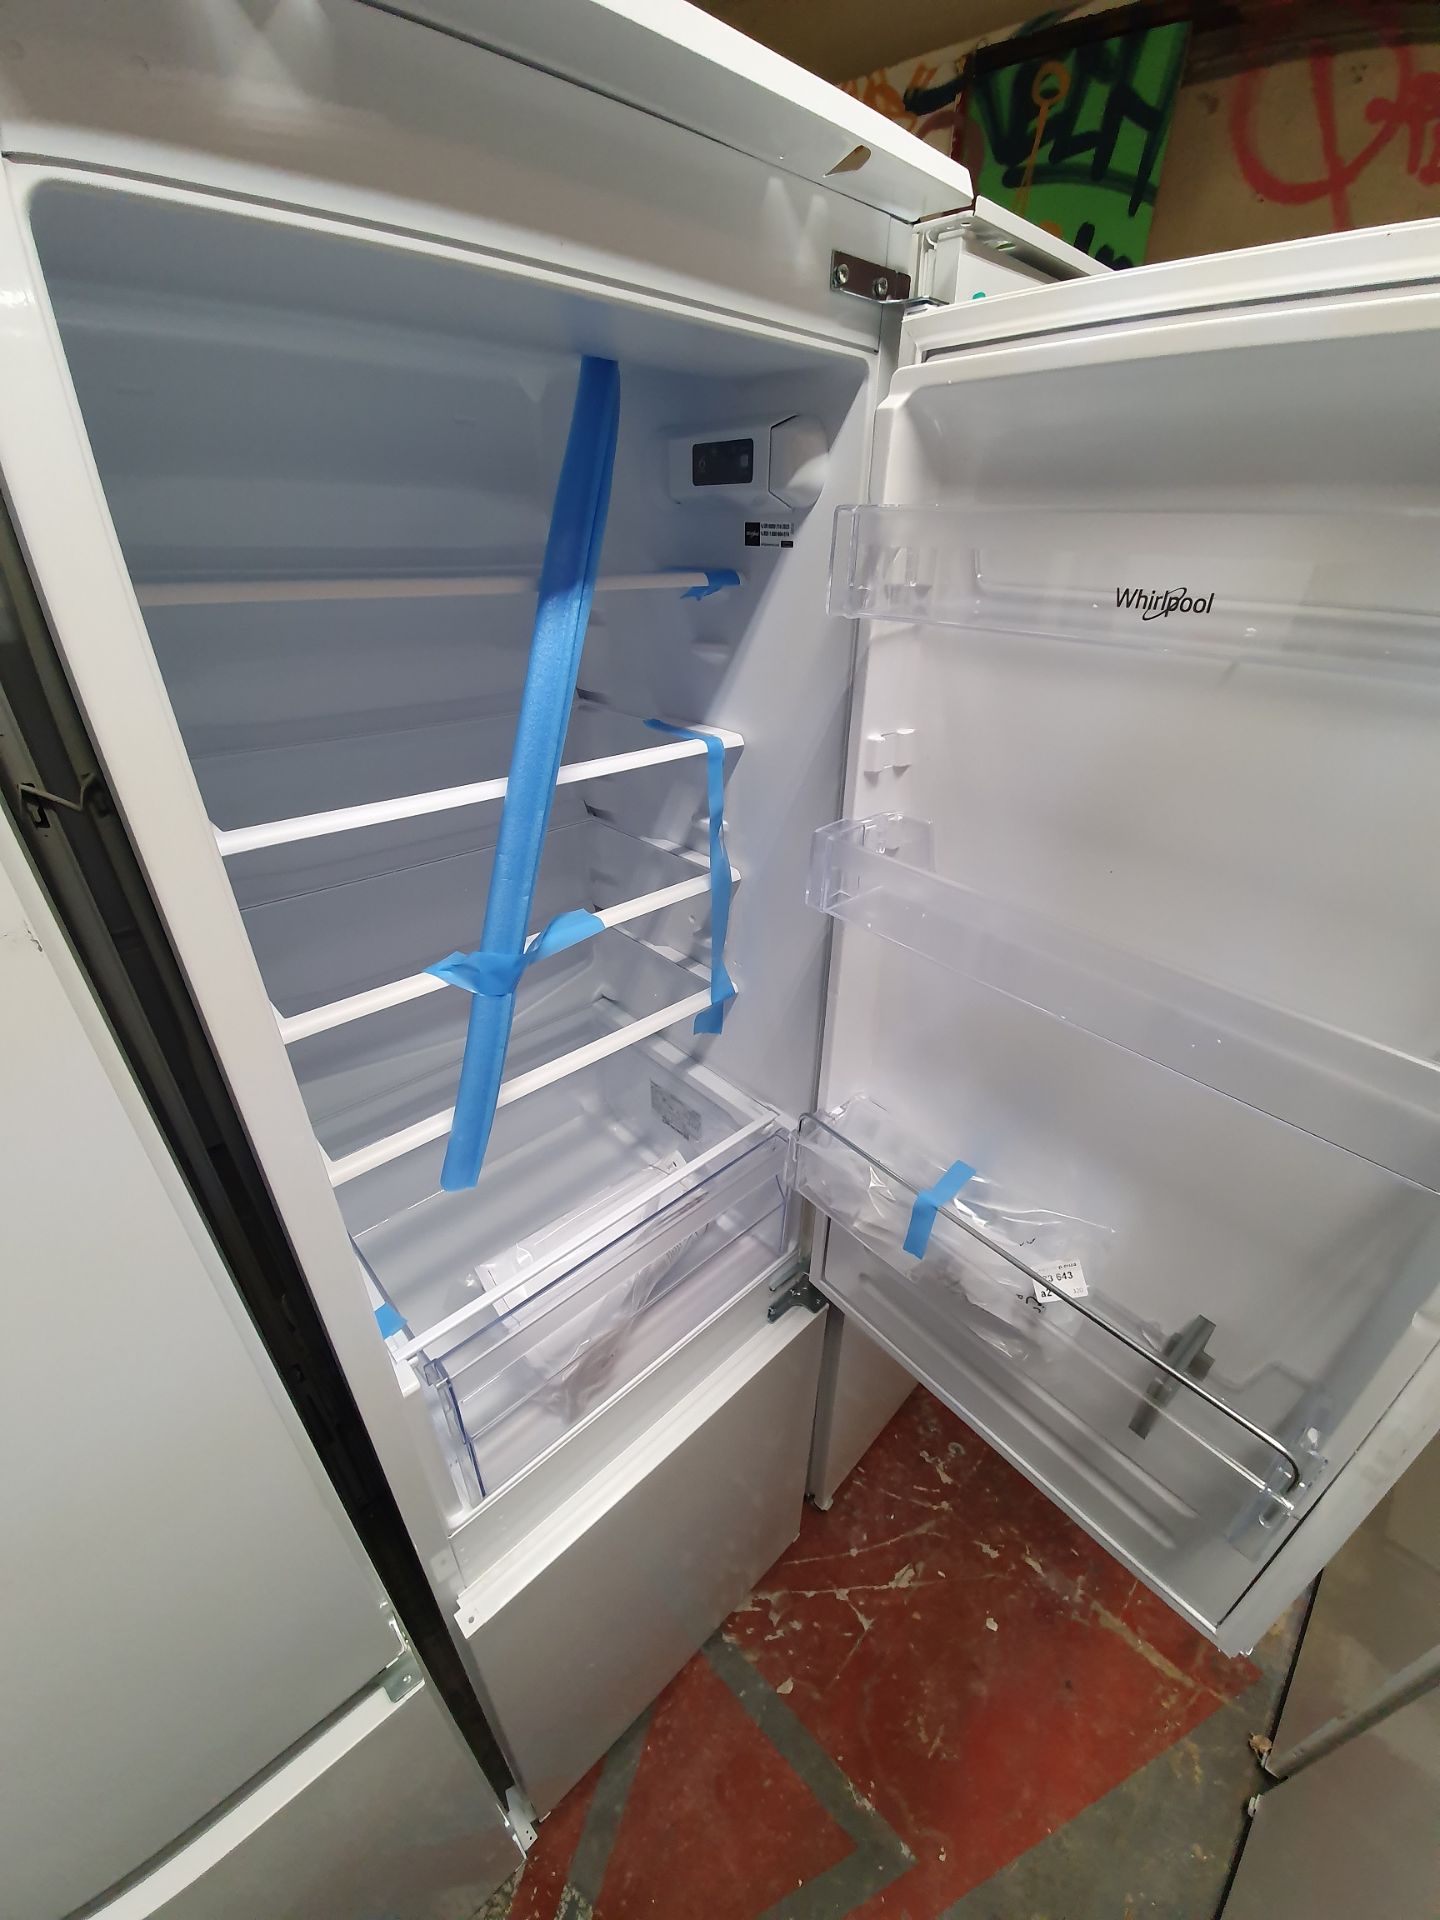 NEW/GRADED AND UNPACKAGED Prima Plus PRRF700 Built In Frost Free Fridge Freezer (Brand new slight - Image 10 of 14